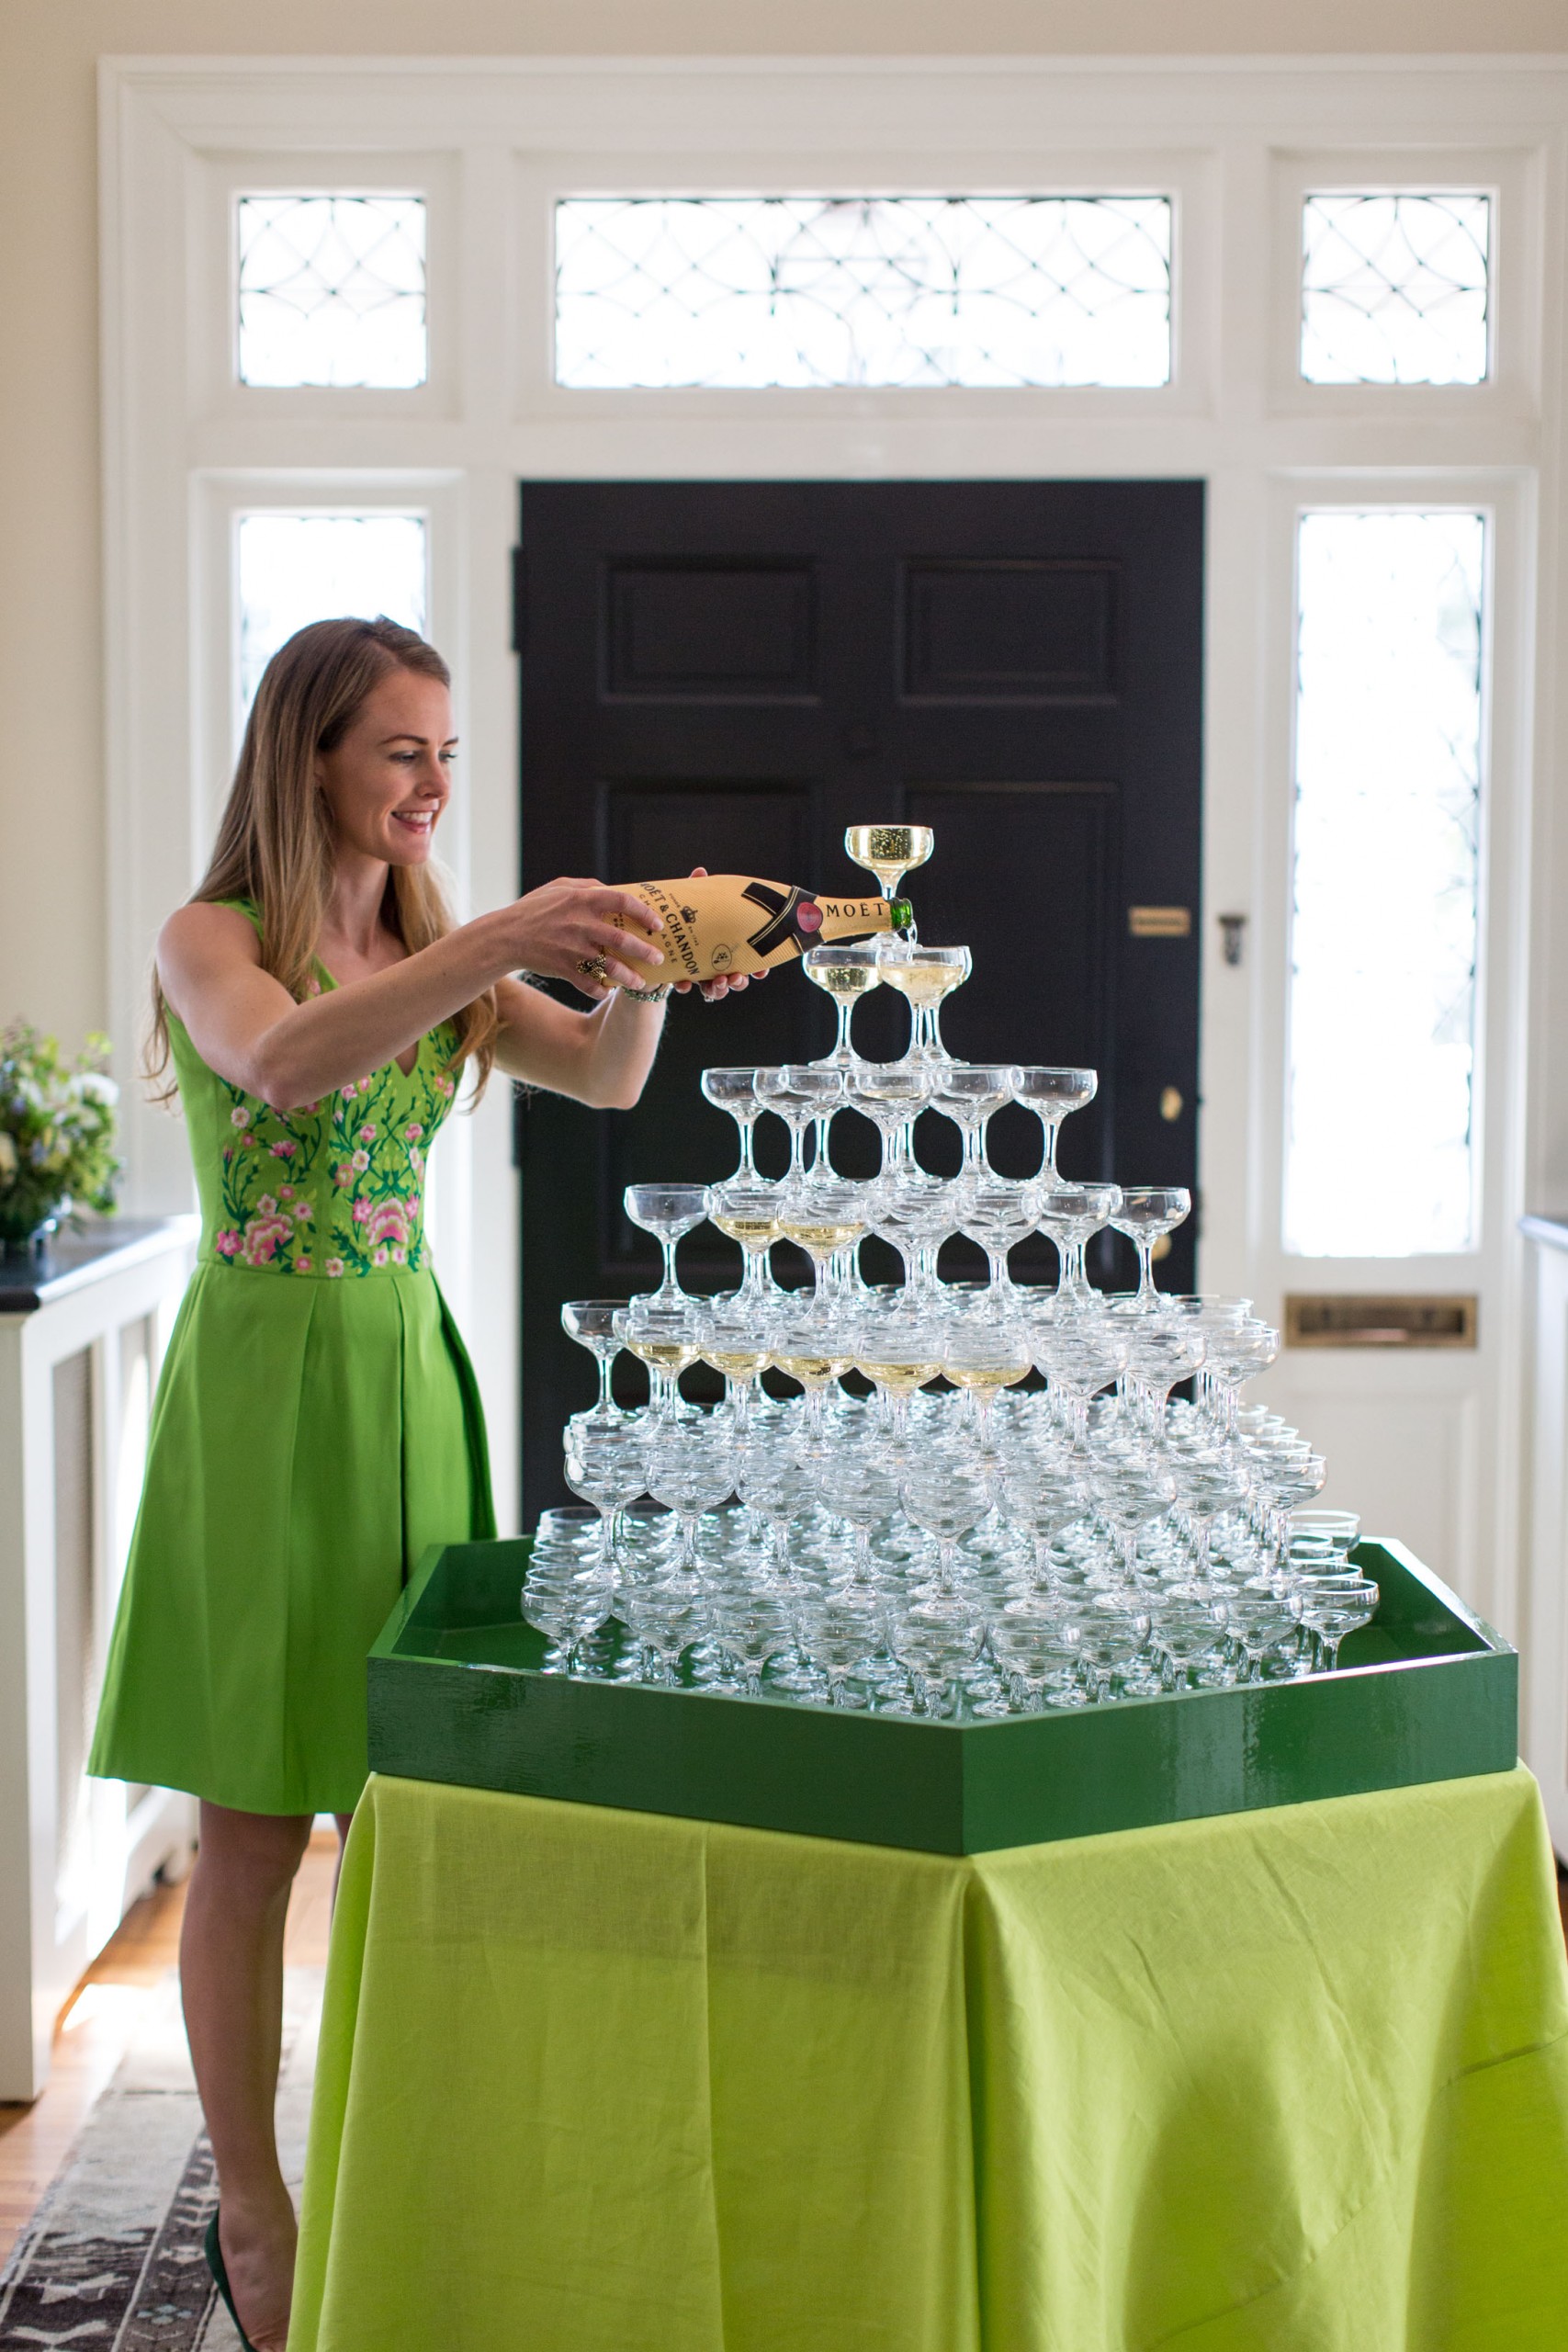 Going Green for Natasha Lawler’s Seventh Annual St. Patrick’s Day Party